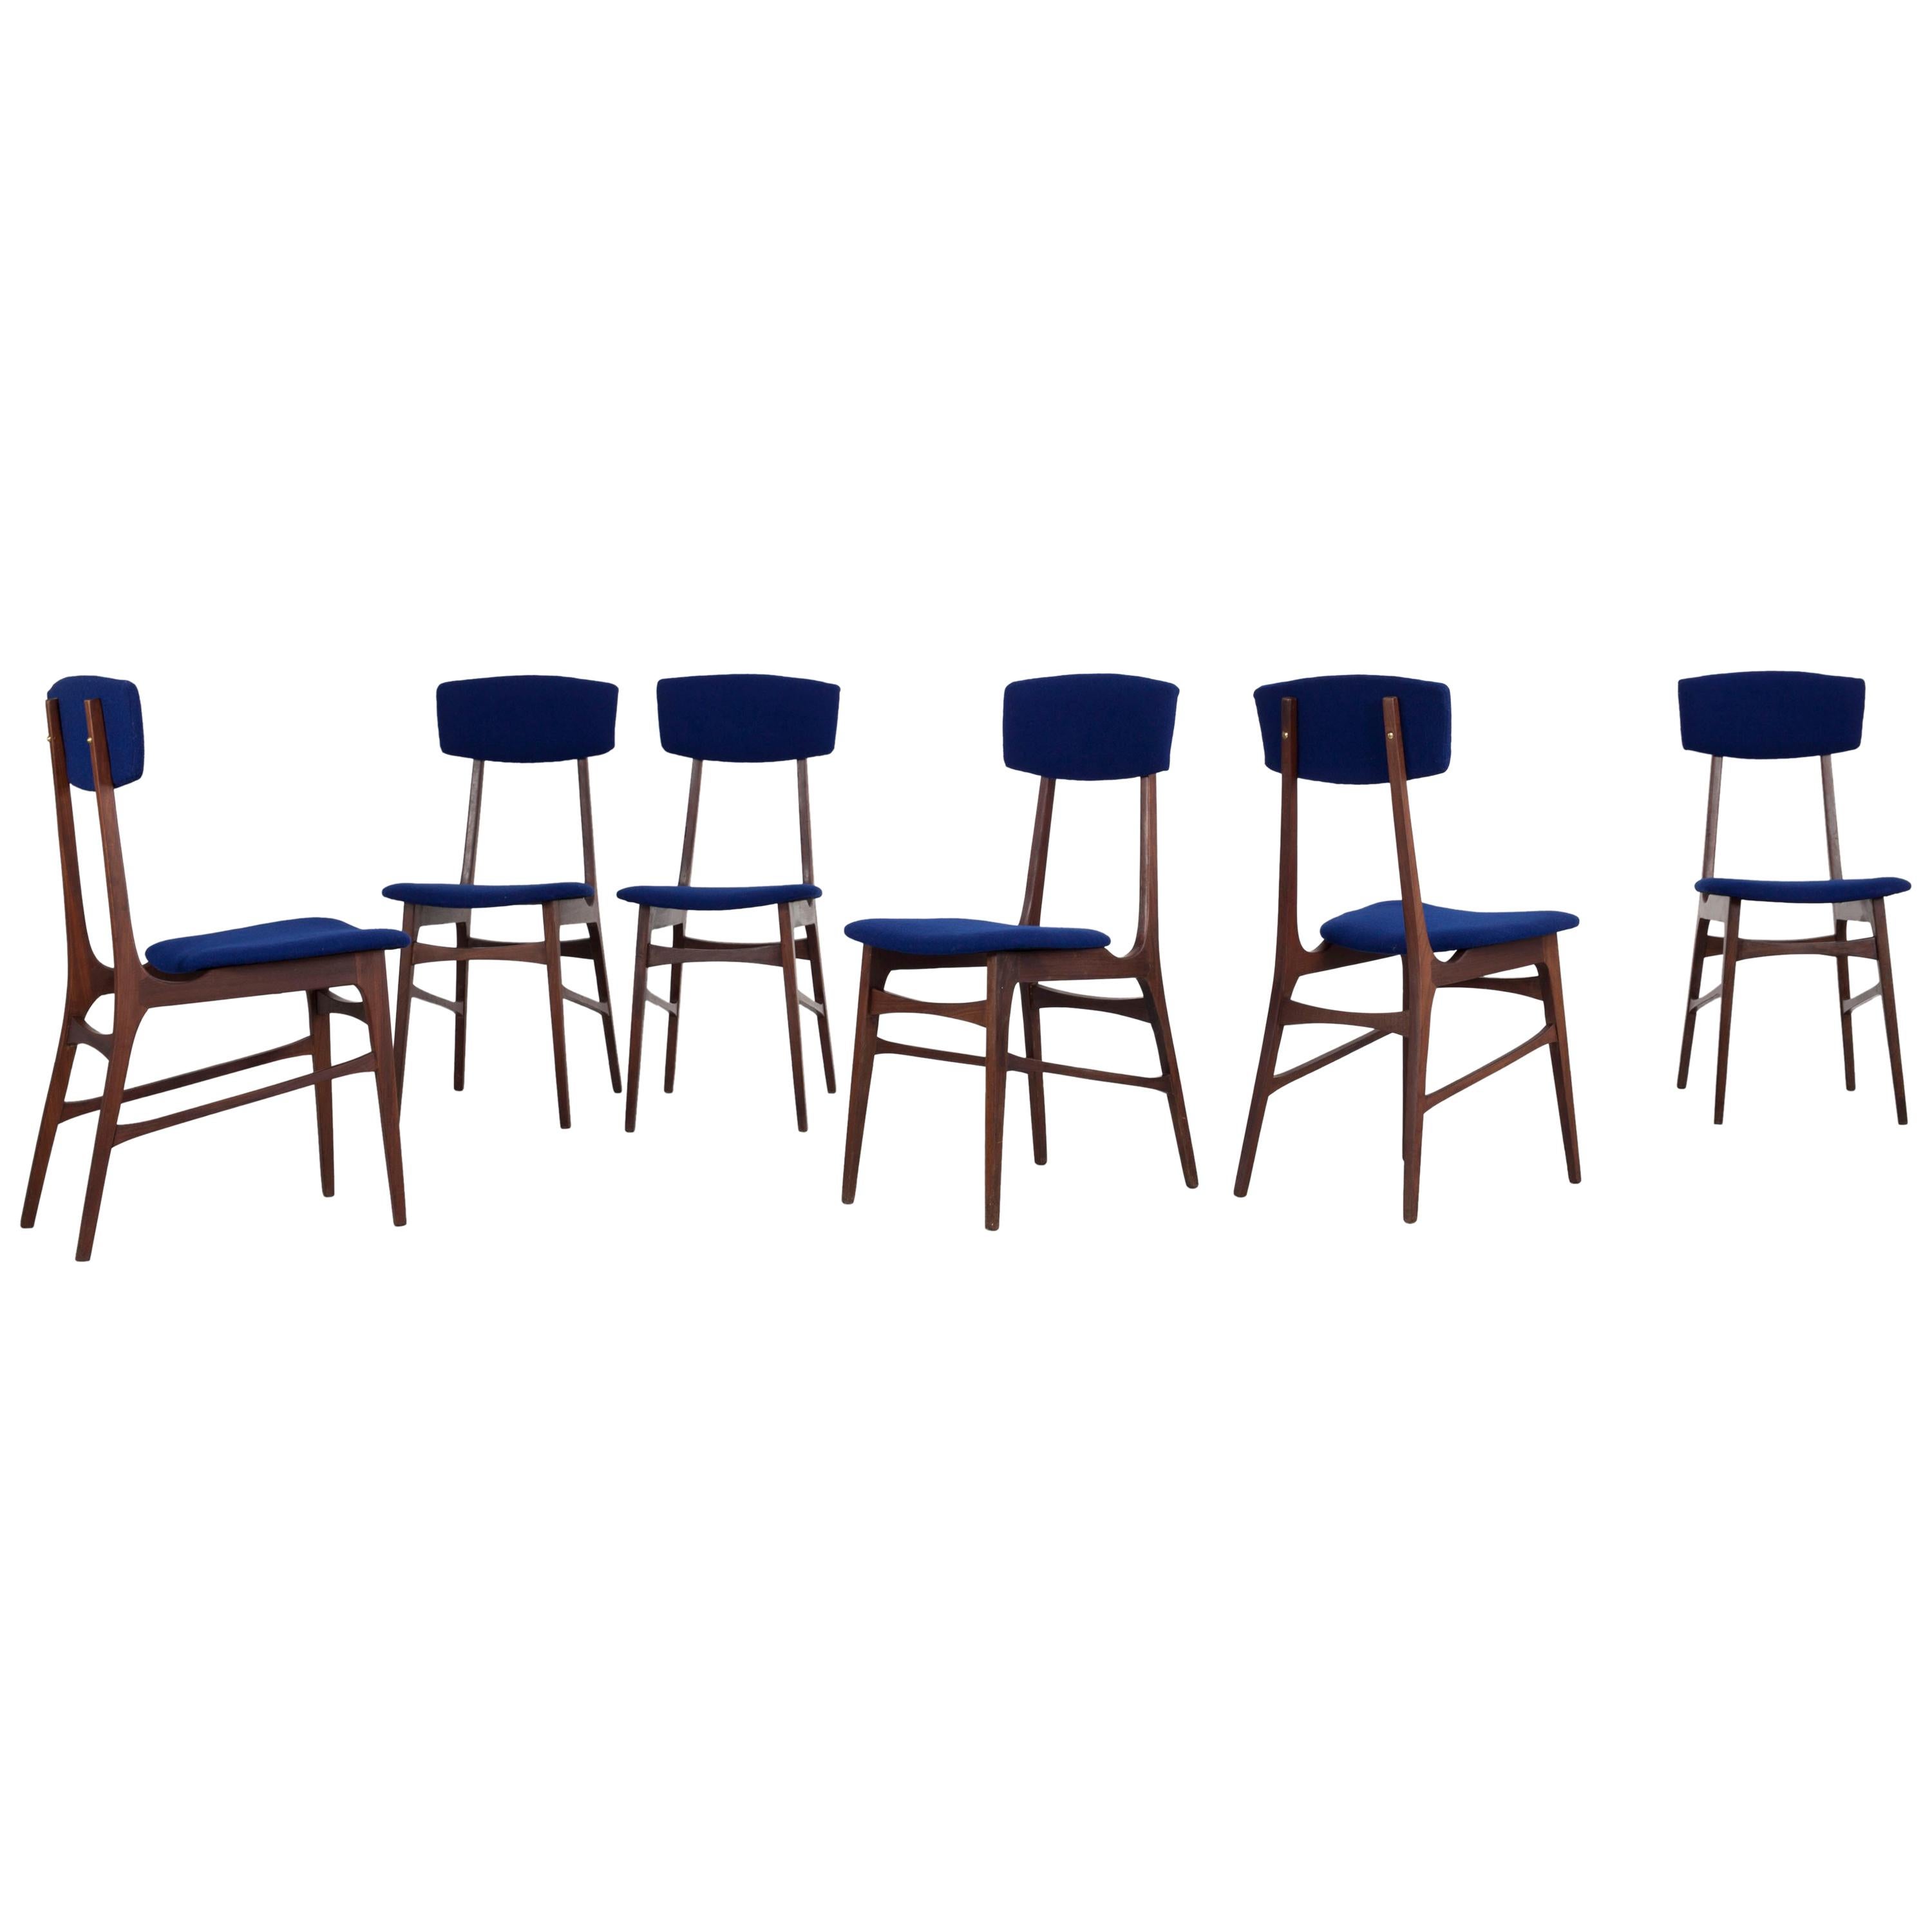 Set of 6 Chairs by Pompeo Fumagalli-Mariano Comese, Italy, 1960 For Sale